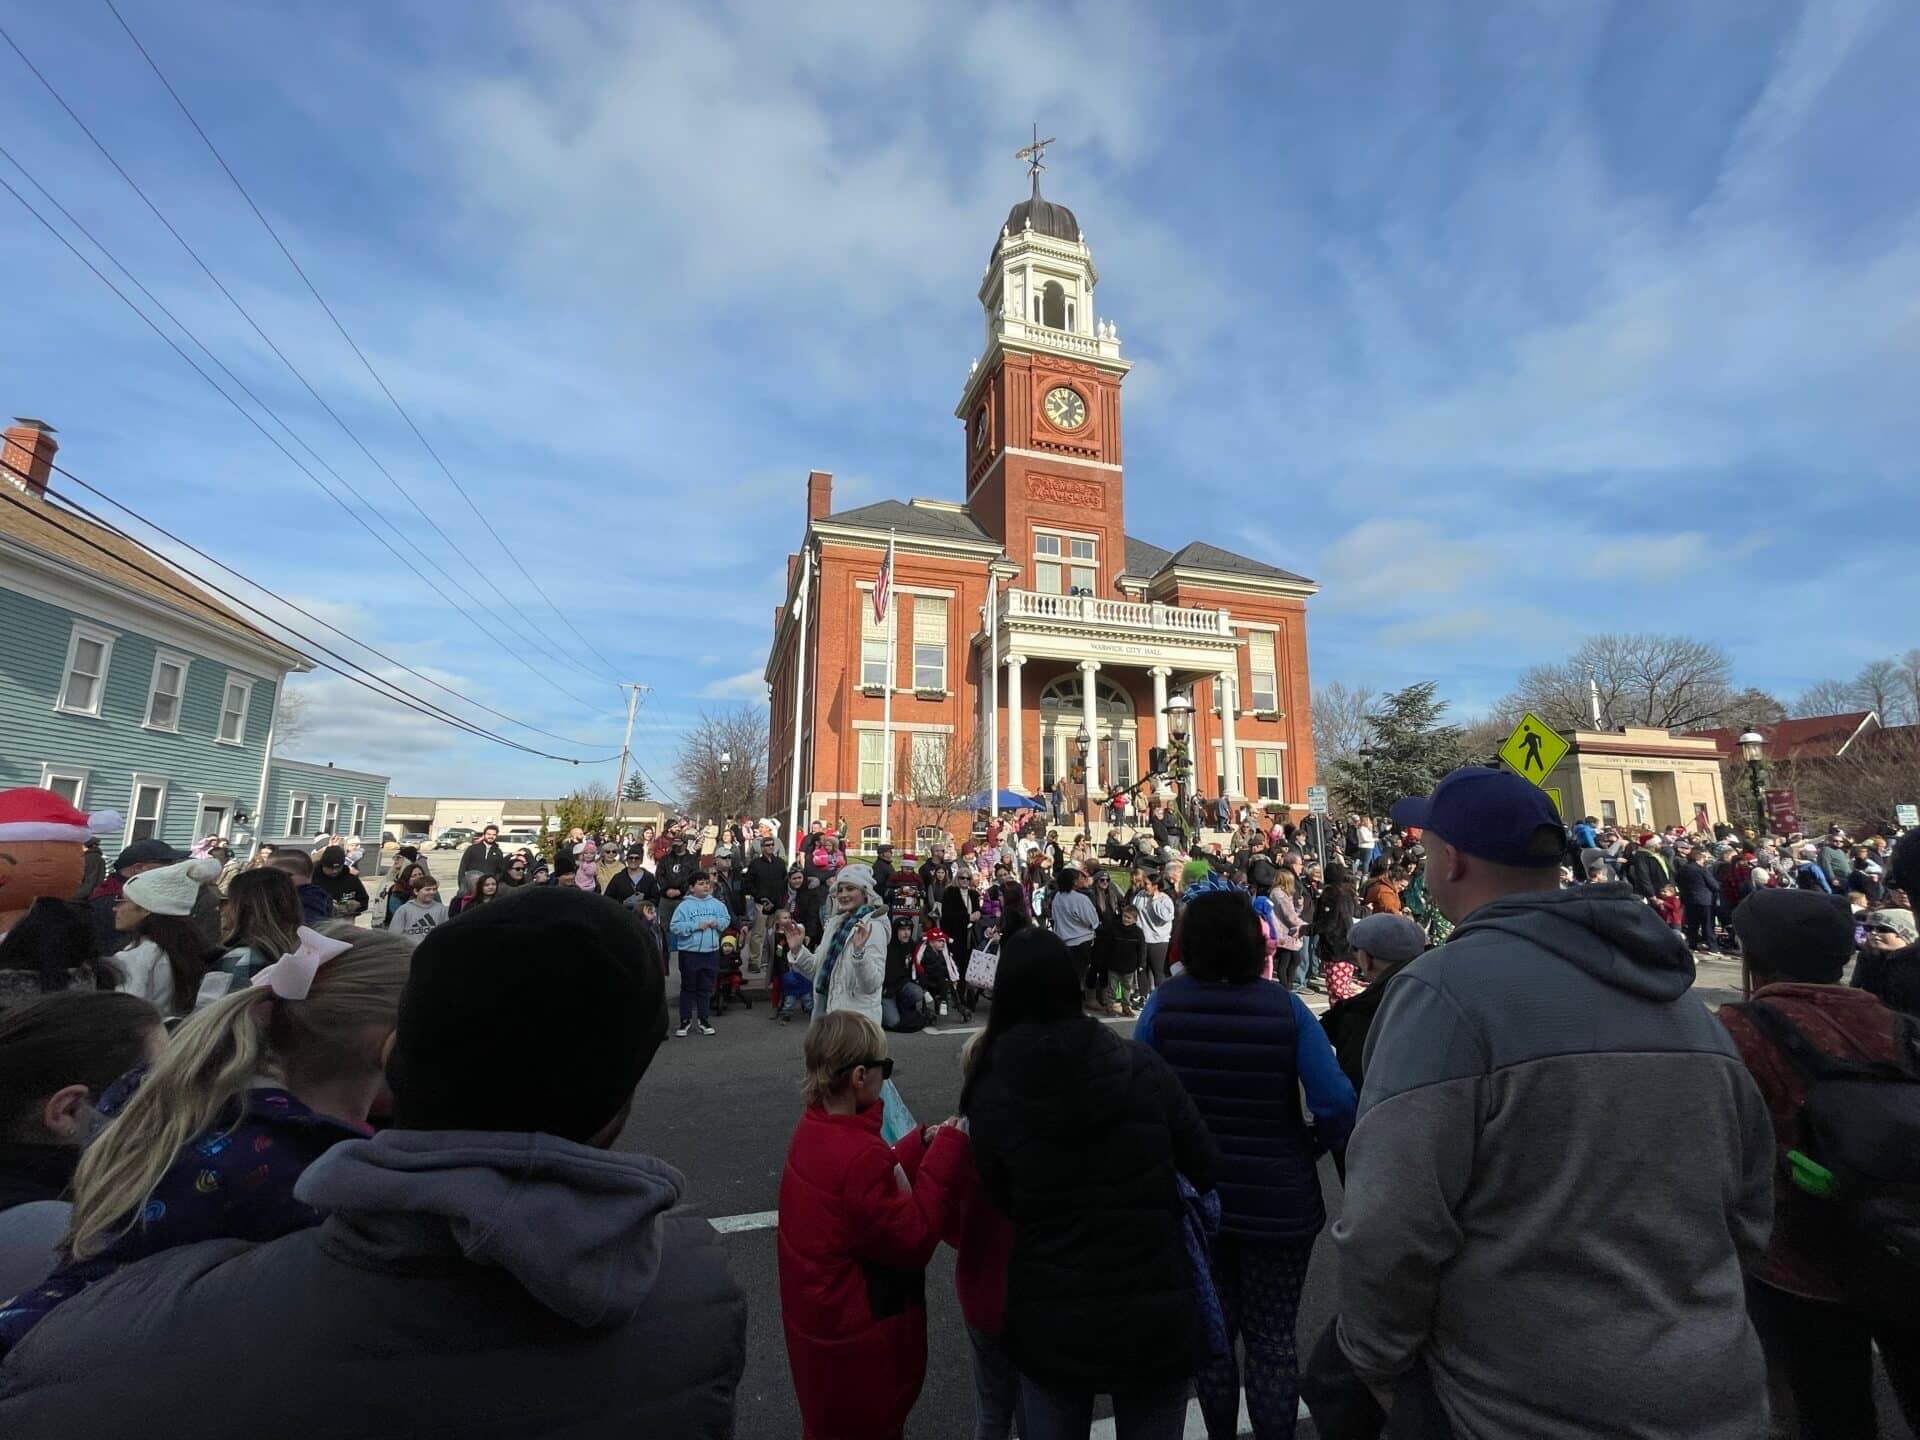 [CREDIT: Rob Borkowski] The Rolling, Strolling Apponaug Winter Festival is drawing big crowds today outside City Hall.